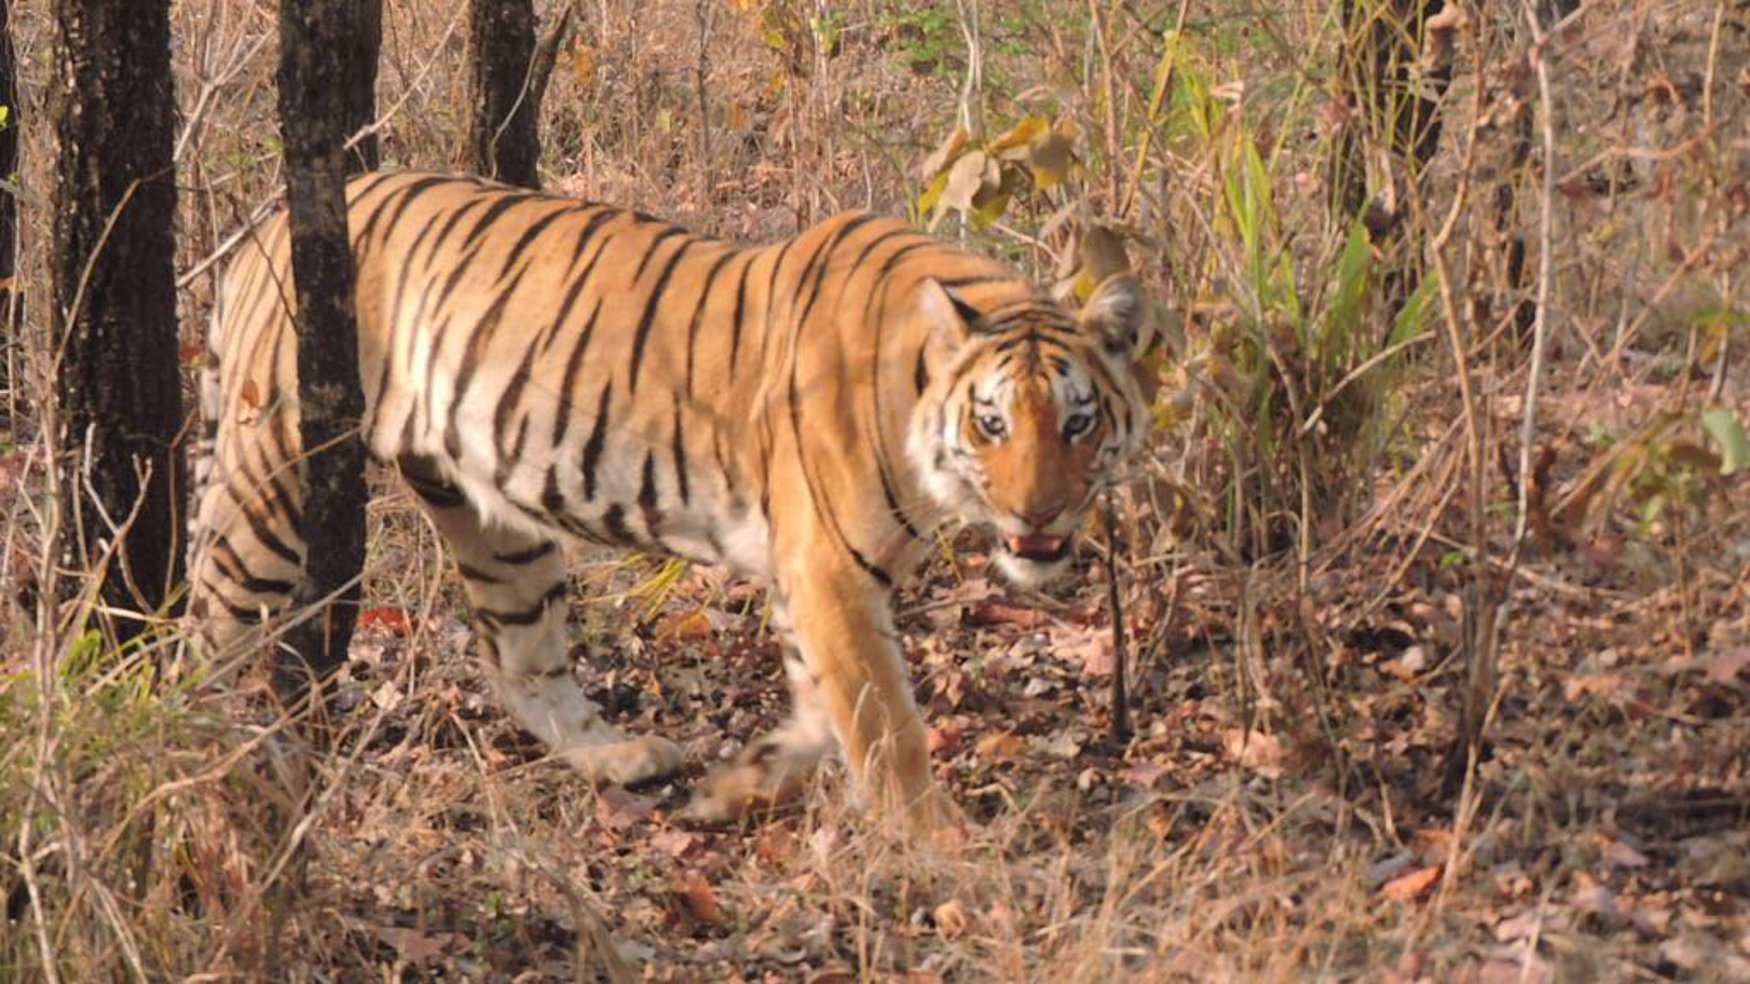 Sanjay Tiger Reserve management silent after the death of tigress and